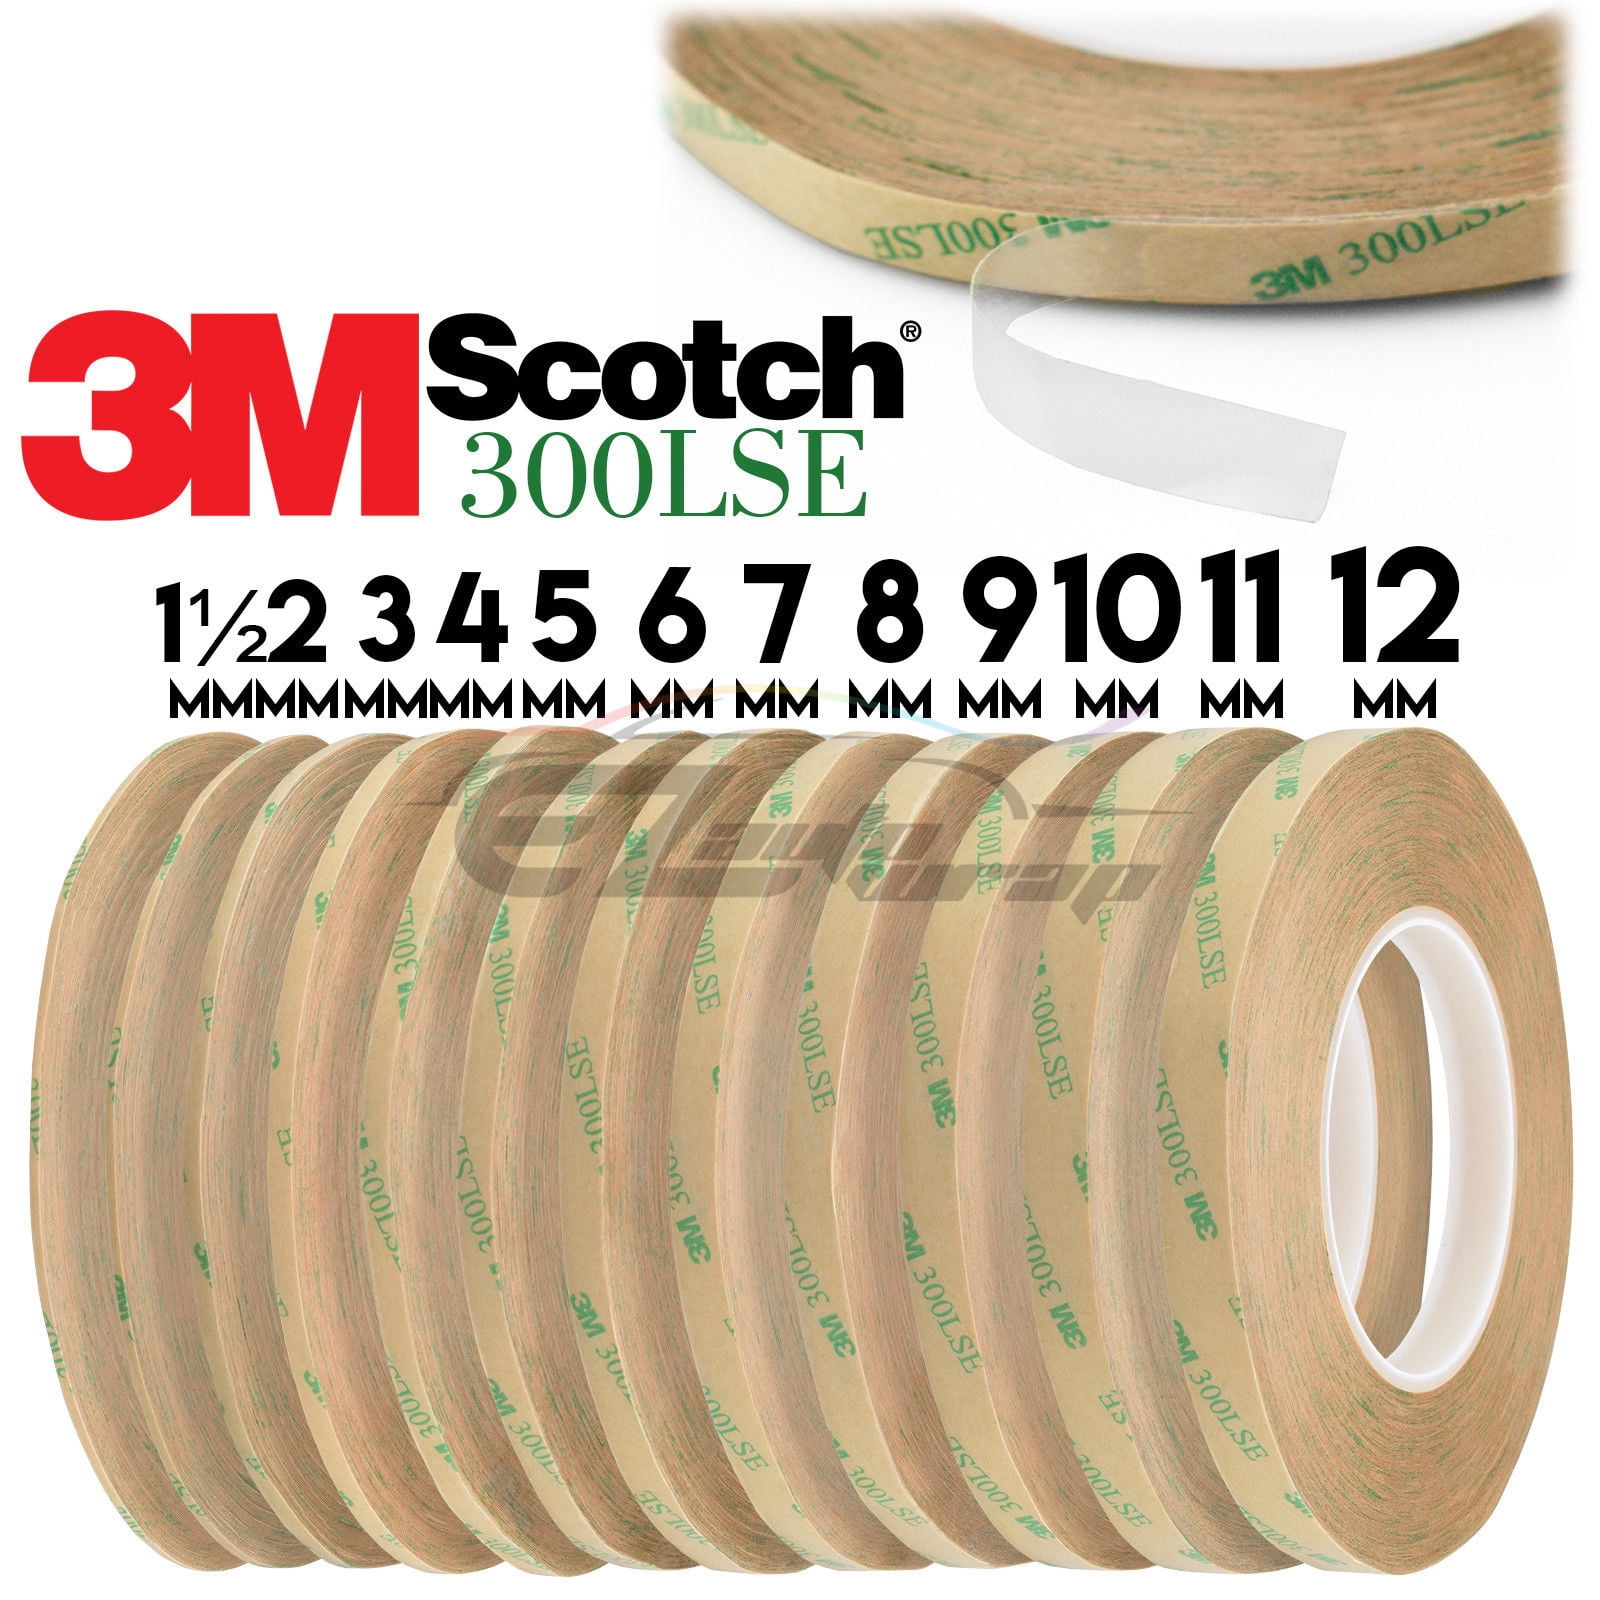 Genuine 3m 300lse 2mm Double Sided Tape Heavy Duty Cell Phone Repair 180ft Long Roll For Iphone Android Galaxy Tablet Lcd Glass Bezel Frame Walmart Com Walmart Com